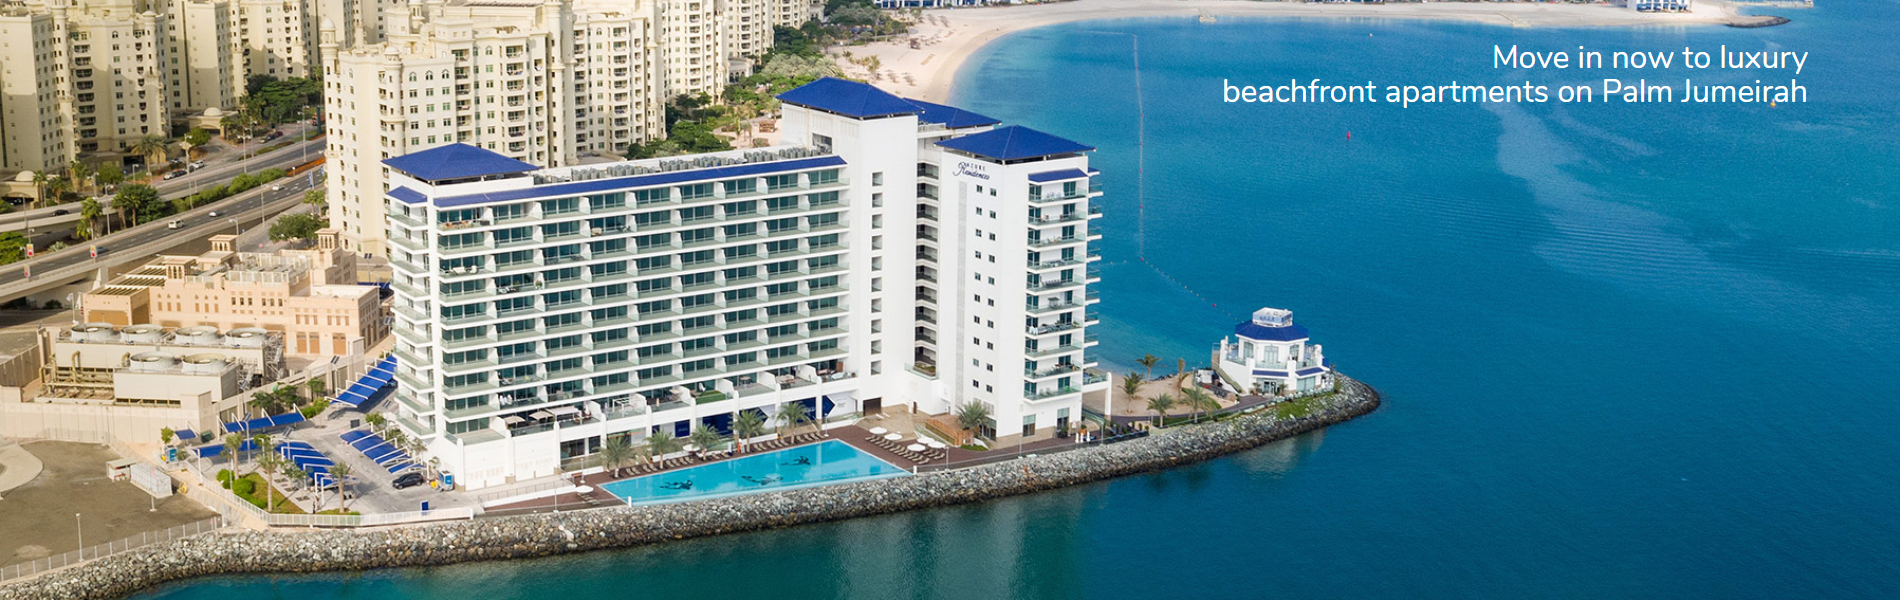 Azure residences apartment at Palm Jumeirah for sale by Nakheel